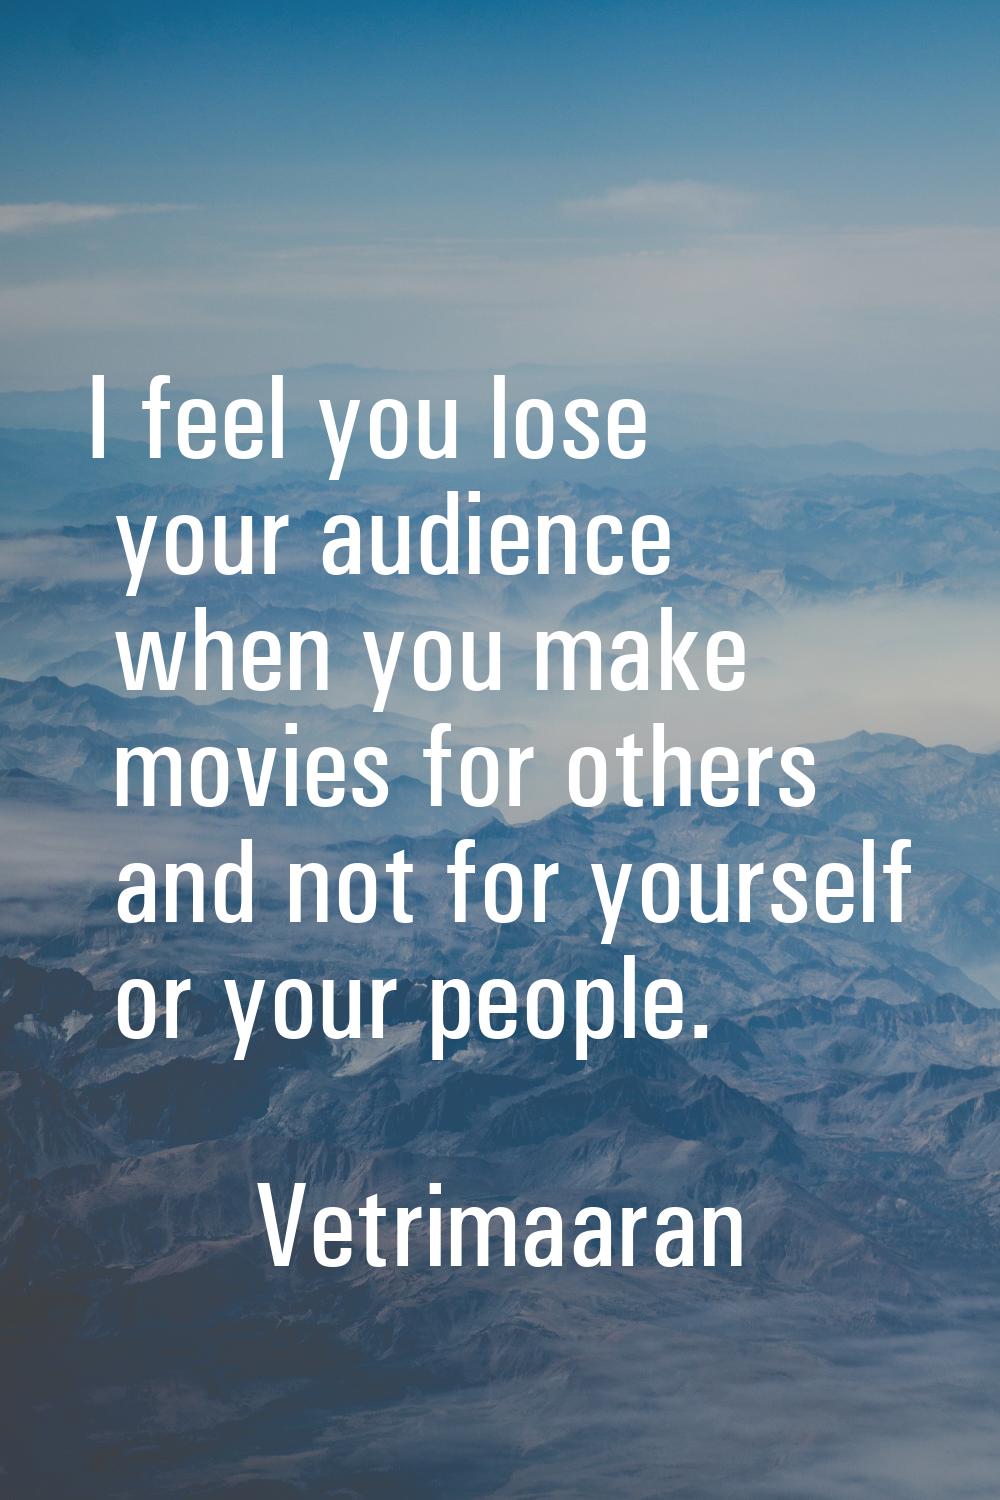 I feel you lose your audience when you make movies for others and not for yourself or your people.